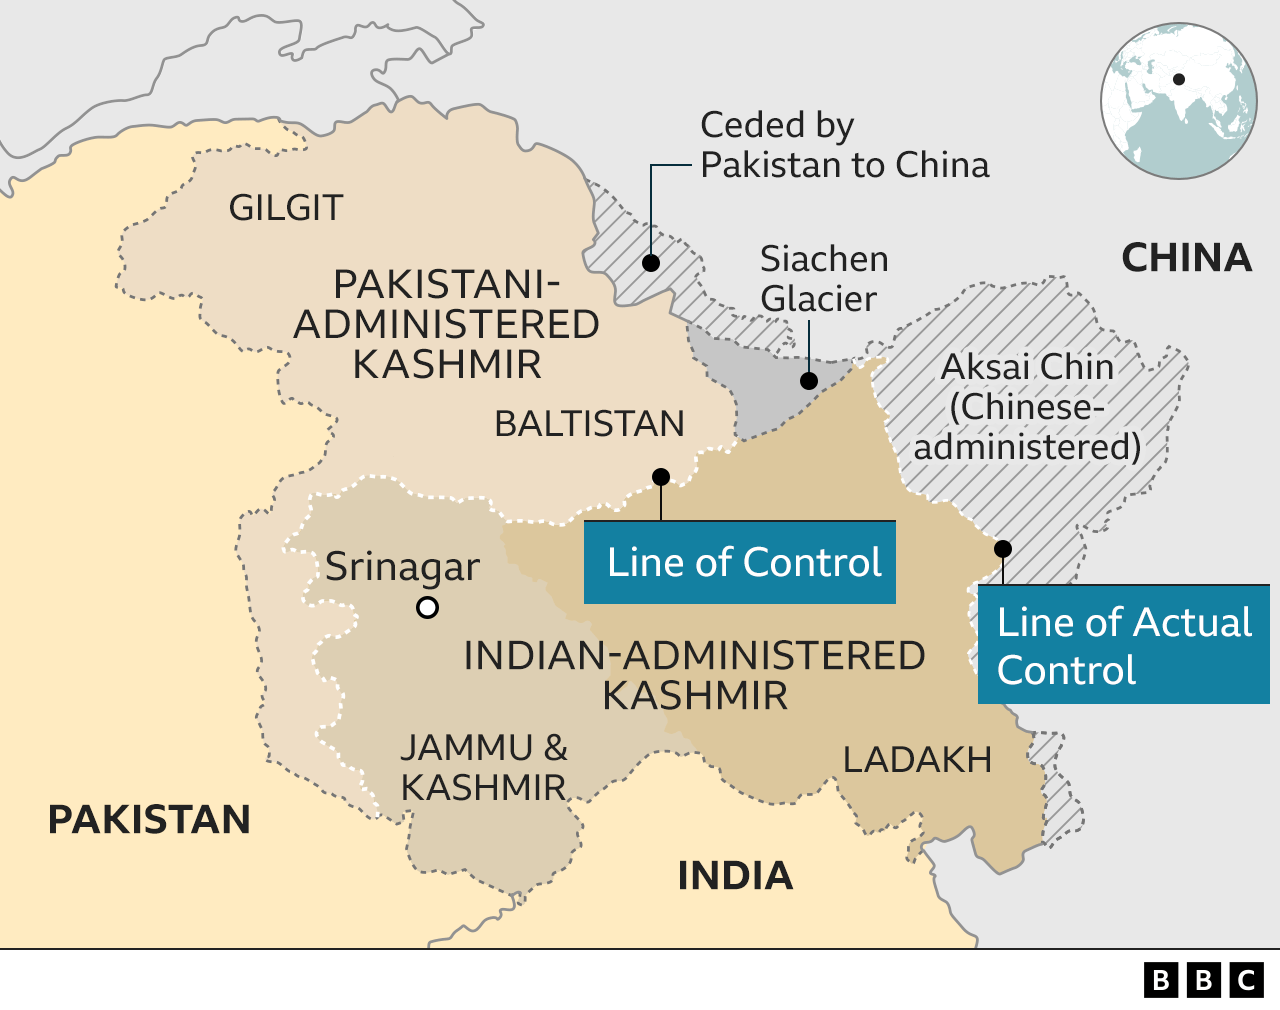  126289826 Kashmir Detailed Lines Of Control 640 Nc 